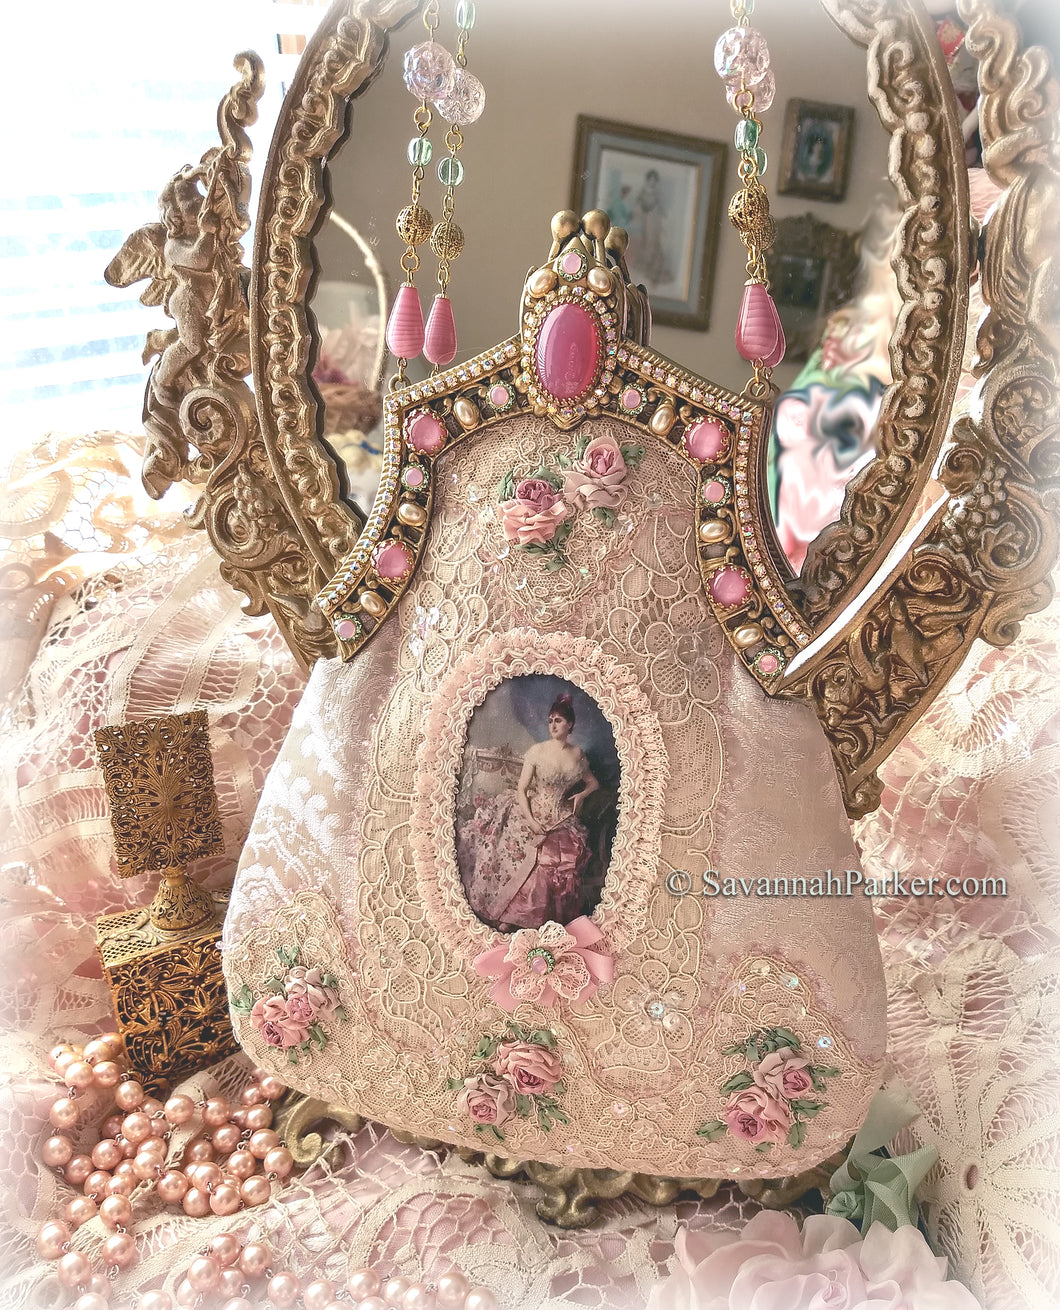 SOLD OUT Antique Style Victorian Edwardian Silk Ribbon Roses Purse - Jeweled Frame - Antique Lace Trim - Silk Ribbonwork Embroidery - Ready to Ship